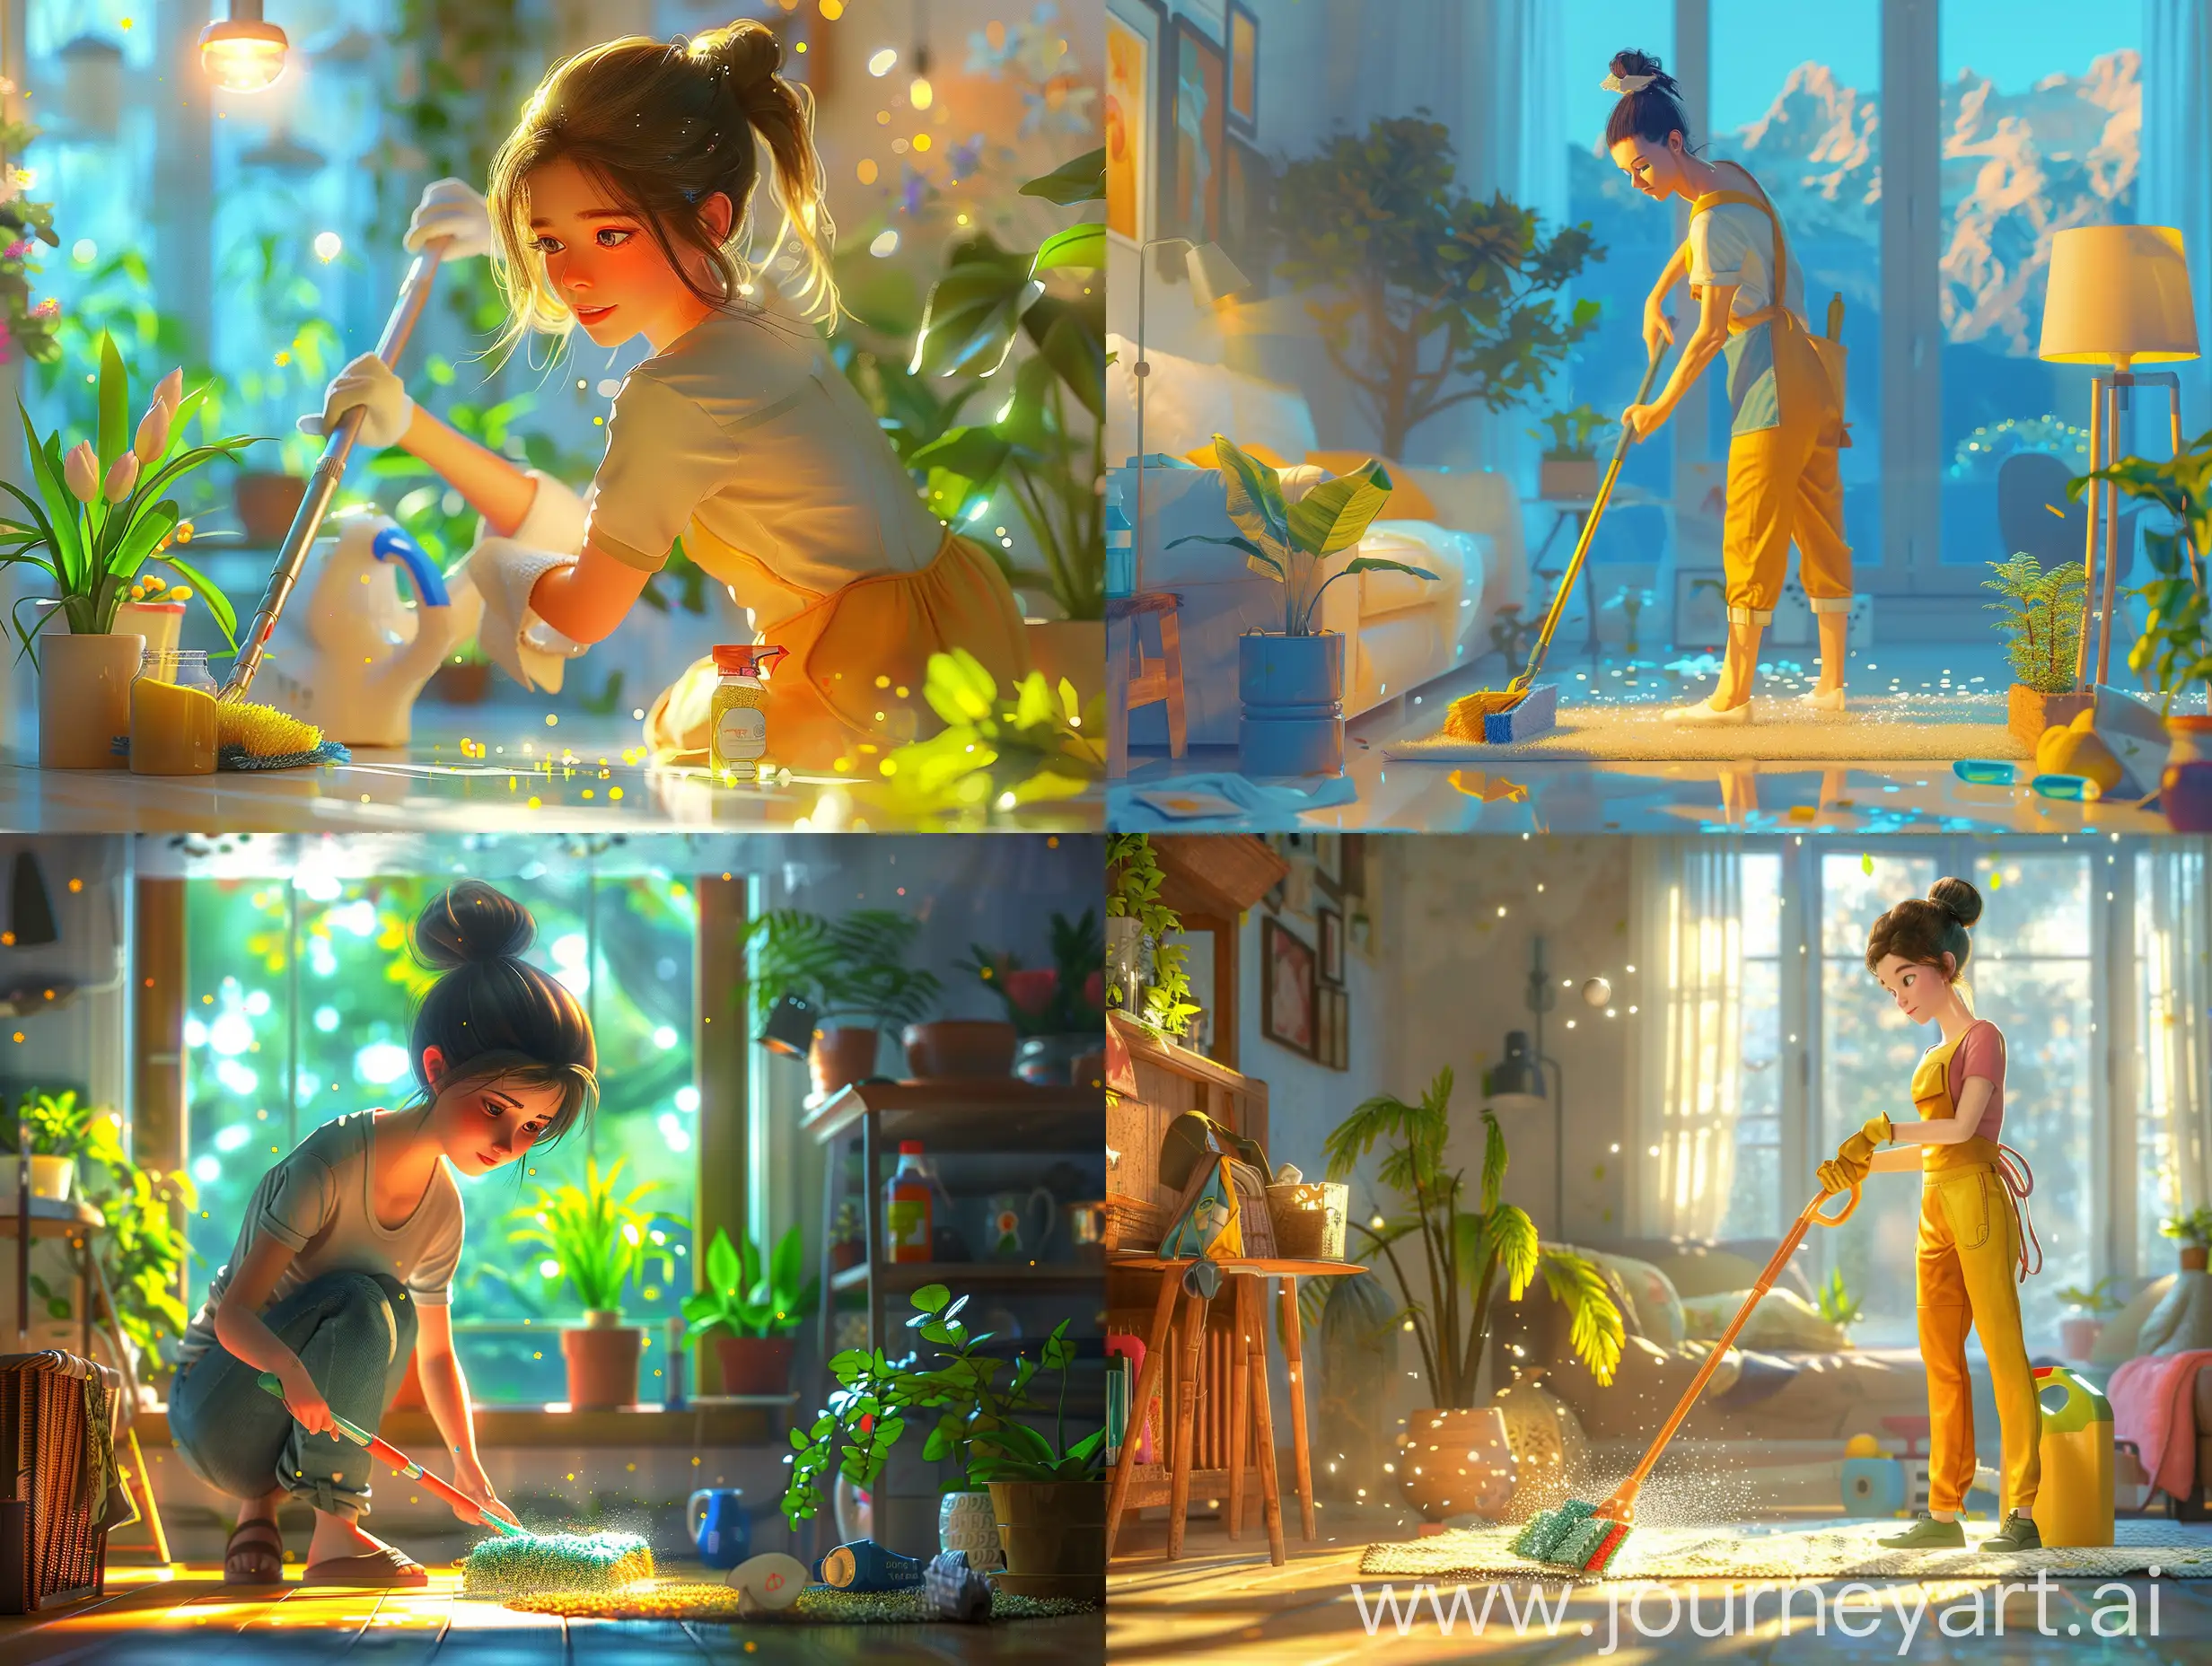 Professional-Cleaner-in-Bright-Cozy-Room-Hyper-Realistic-Cleaning-Scene-with-Glitter-and-Vivid-Lighting